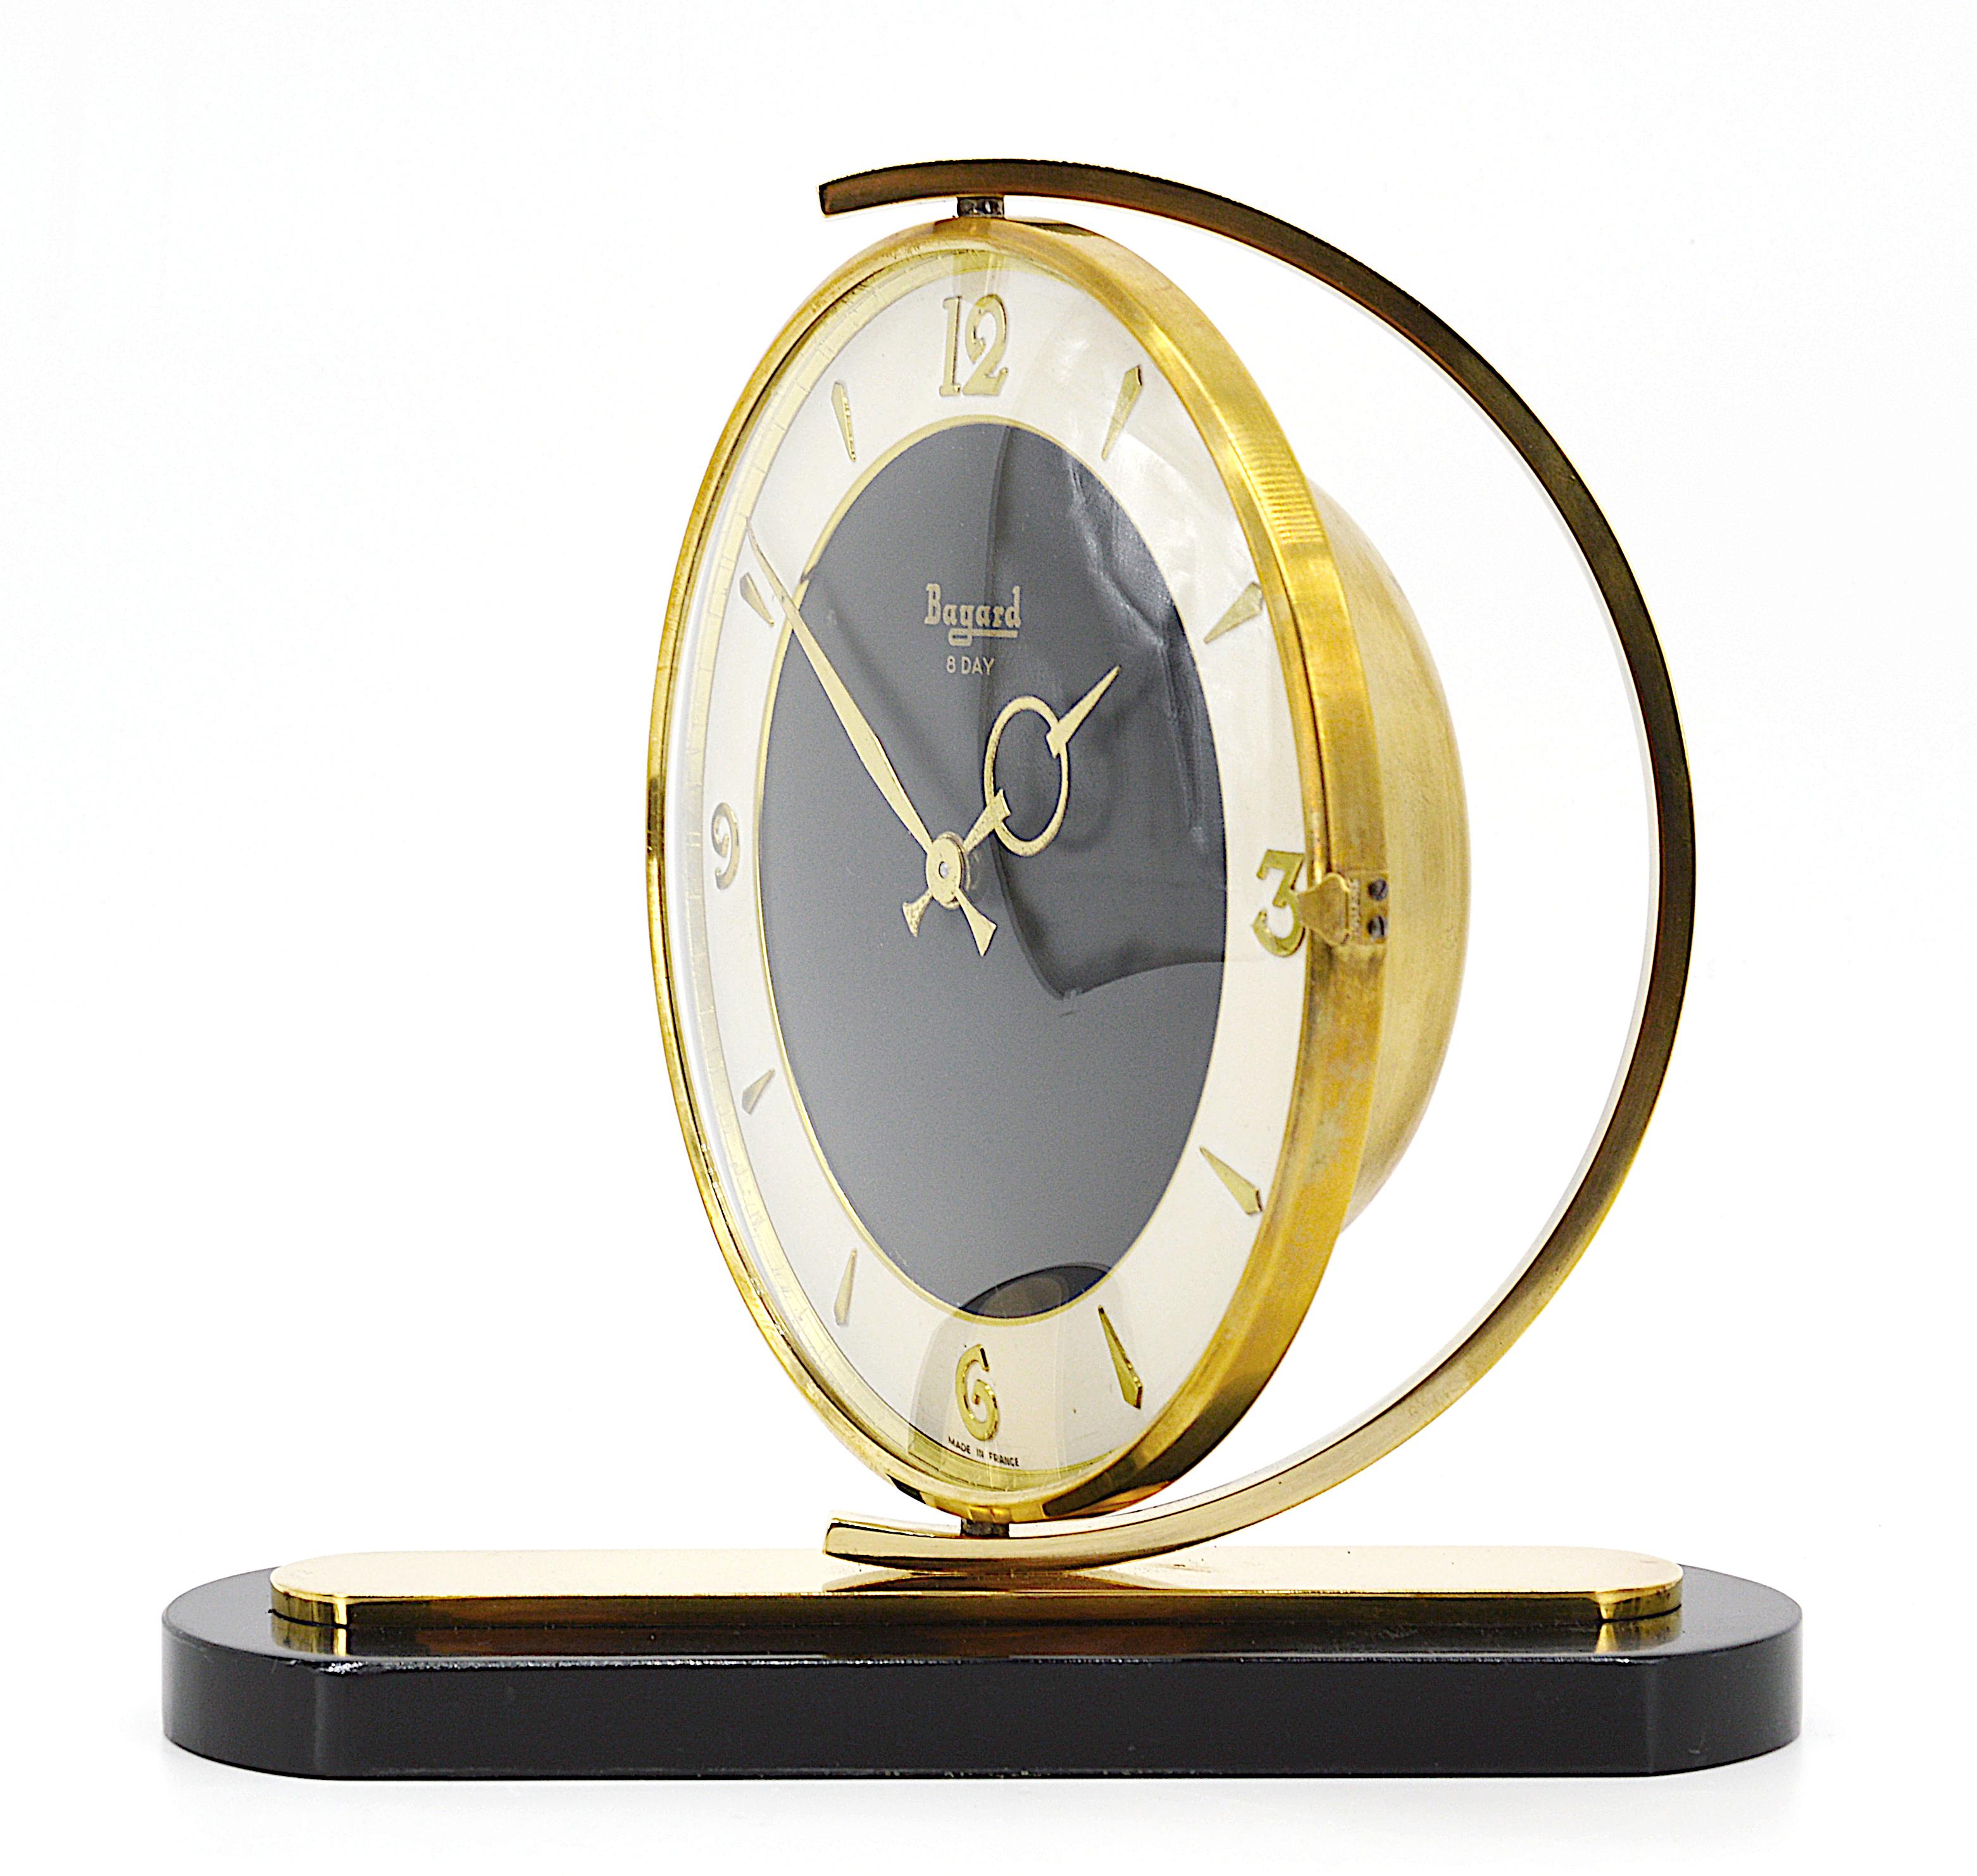 French Art Deco clock by Bayard, France, 1930s. Swivel brass black dial. Marble base. Rounded glass. 8 days movement. Measures: height 7.5